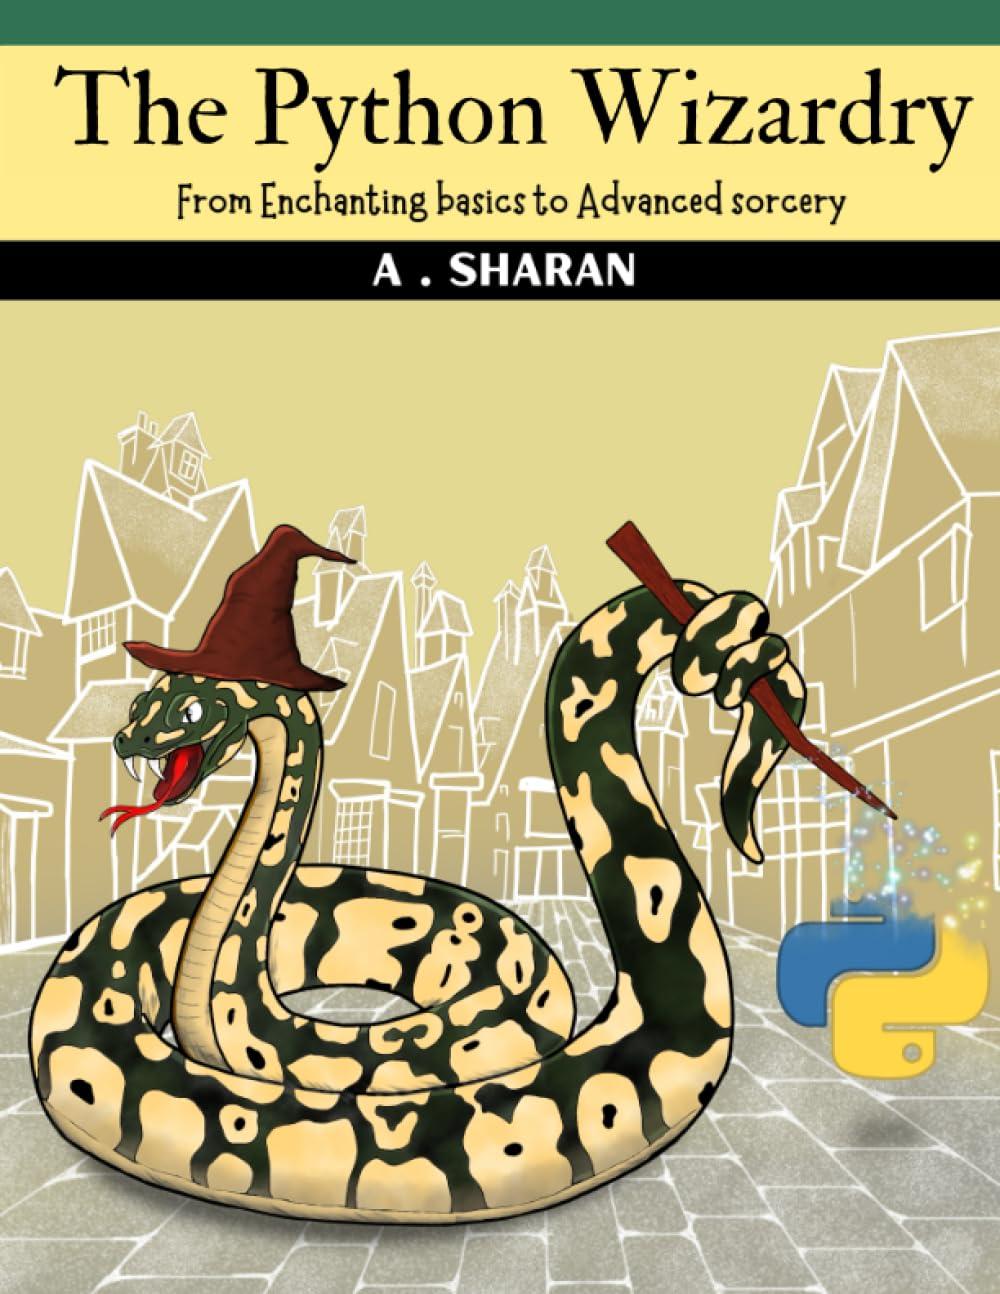 the python wizardry from enchanting basics to advanced sorcery embrace the magic of python like never before